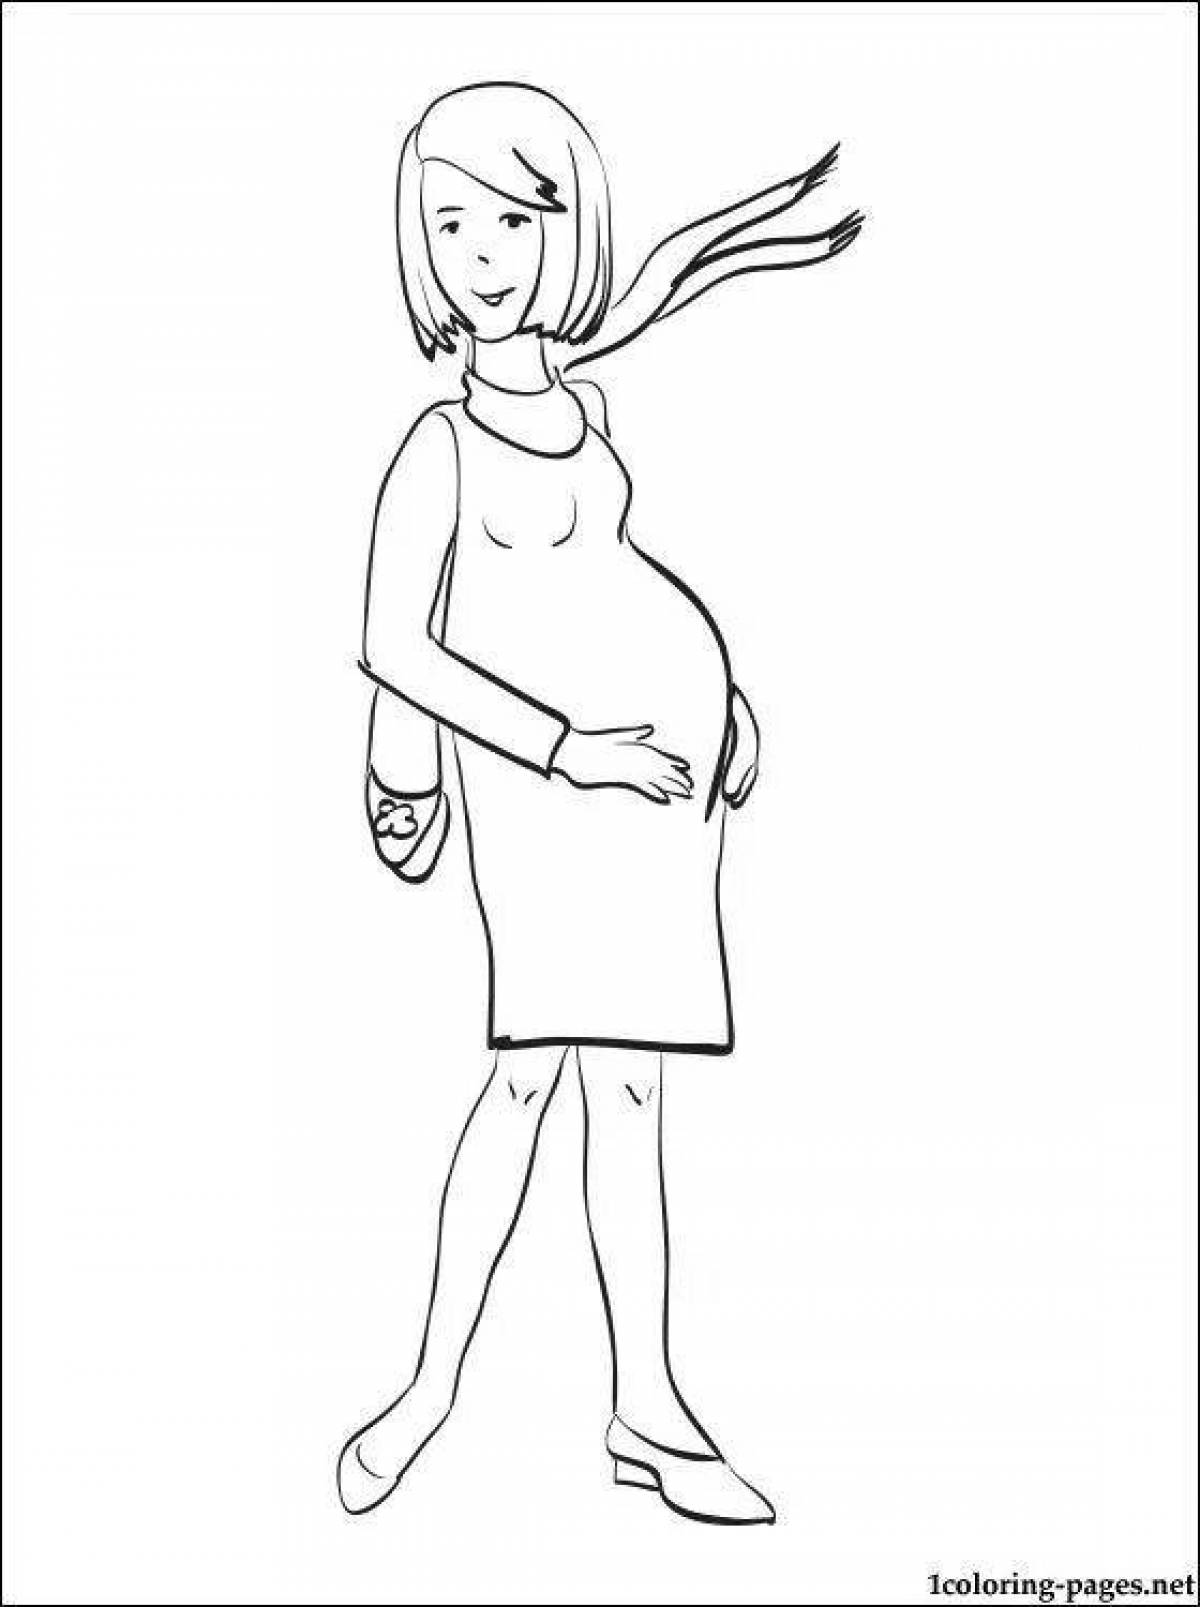 Playful pregnant coloring book